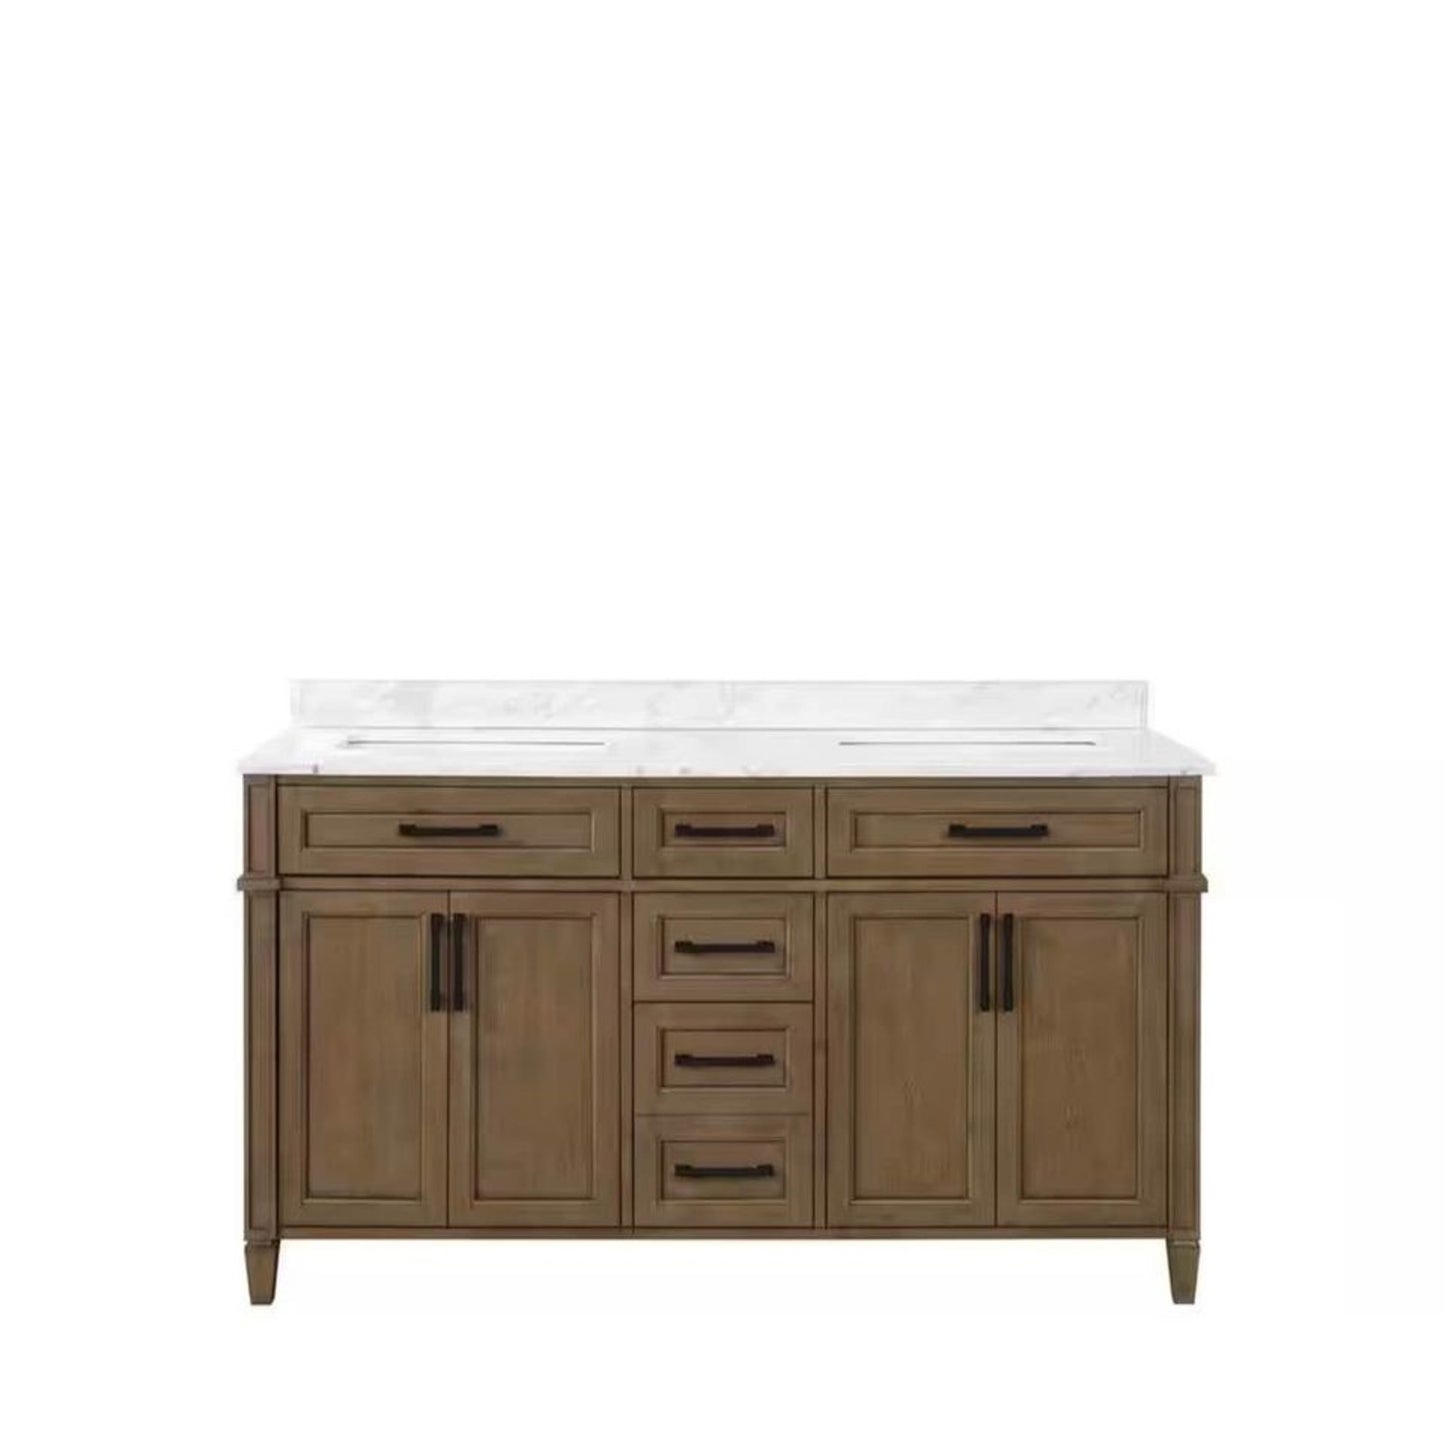 Home Decorators CollectionCaville 60 in. W x 22 in. D x 34 in. H Double Sink Bath Vanity in Almond Latte